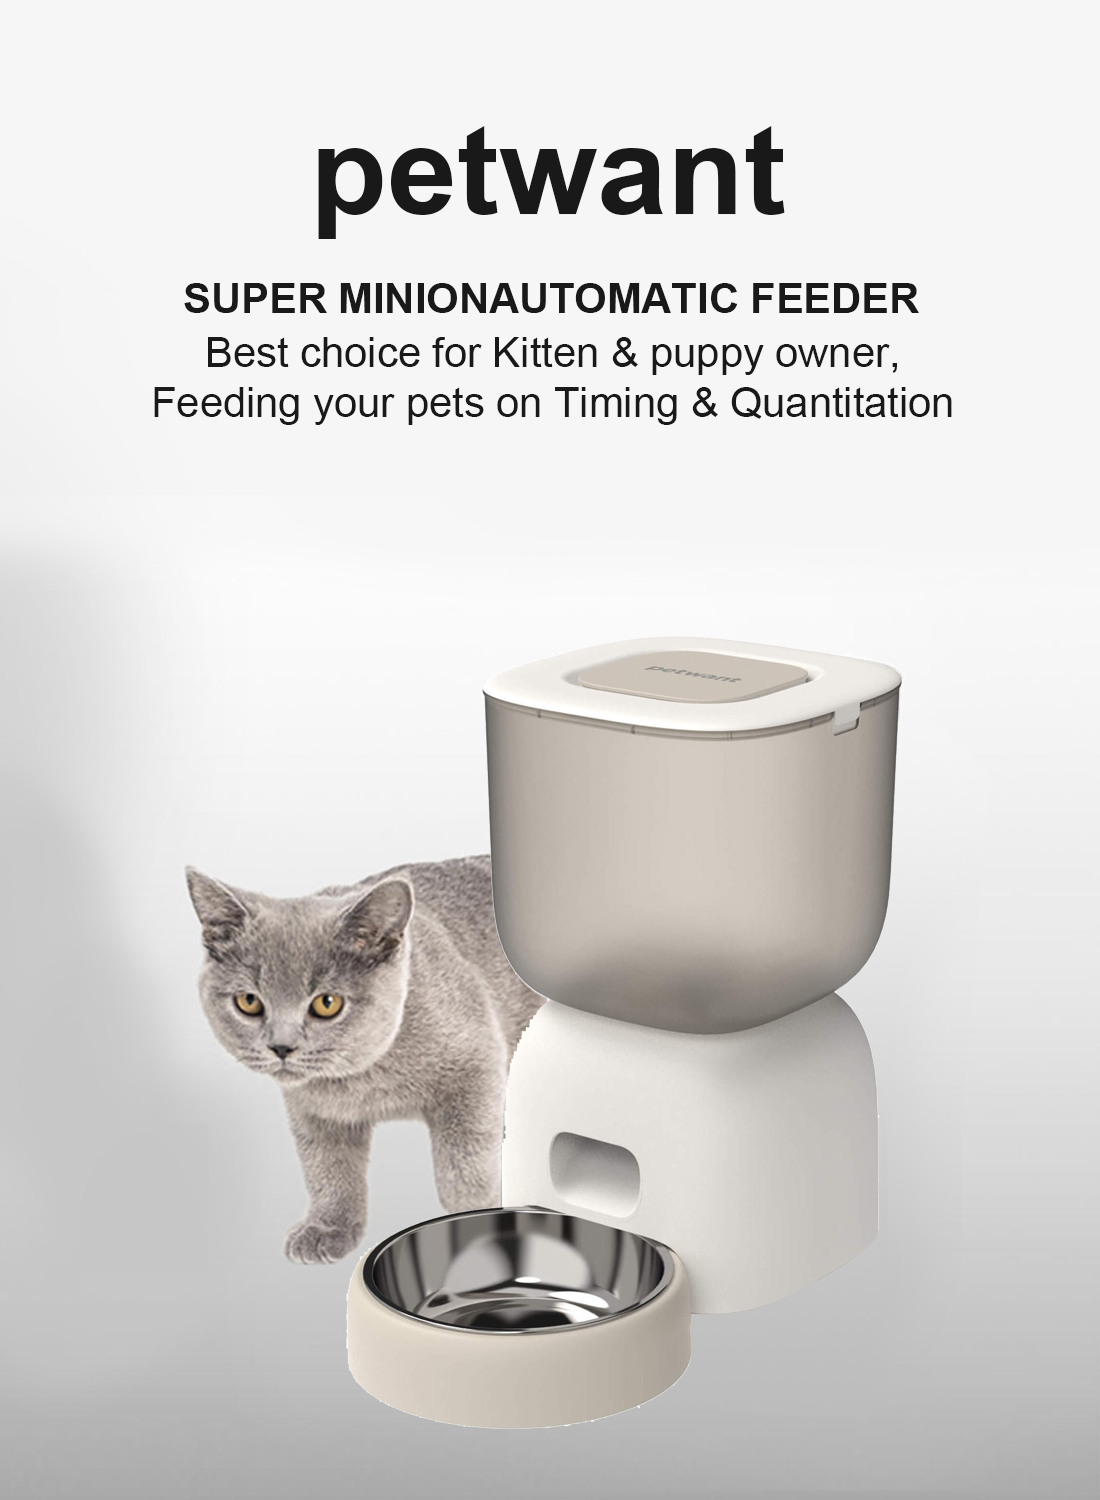 Smart WIFI 3L Pet Feeder 5W Power with UK Plug Timed &amp; Portion-Controlled for Cats &amp; Dogs  Auto Dry Food Dispenser with Clear View &amp; Pest-Resistant Design